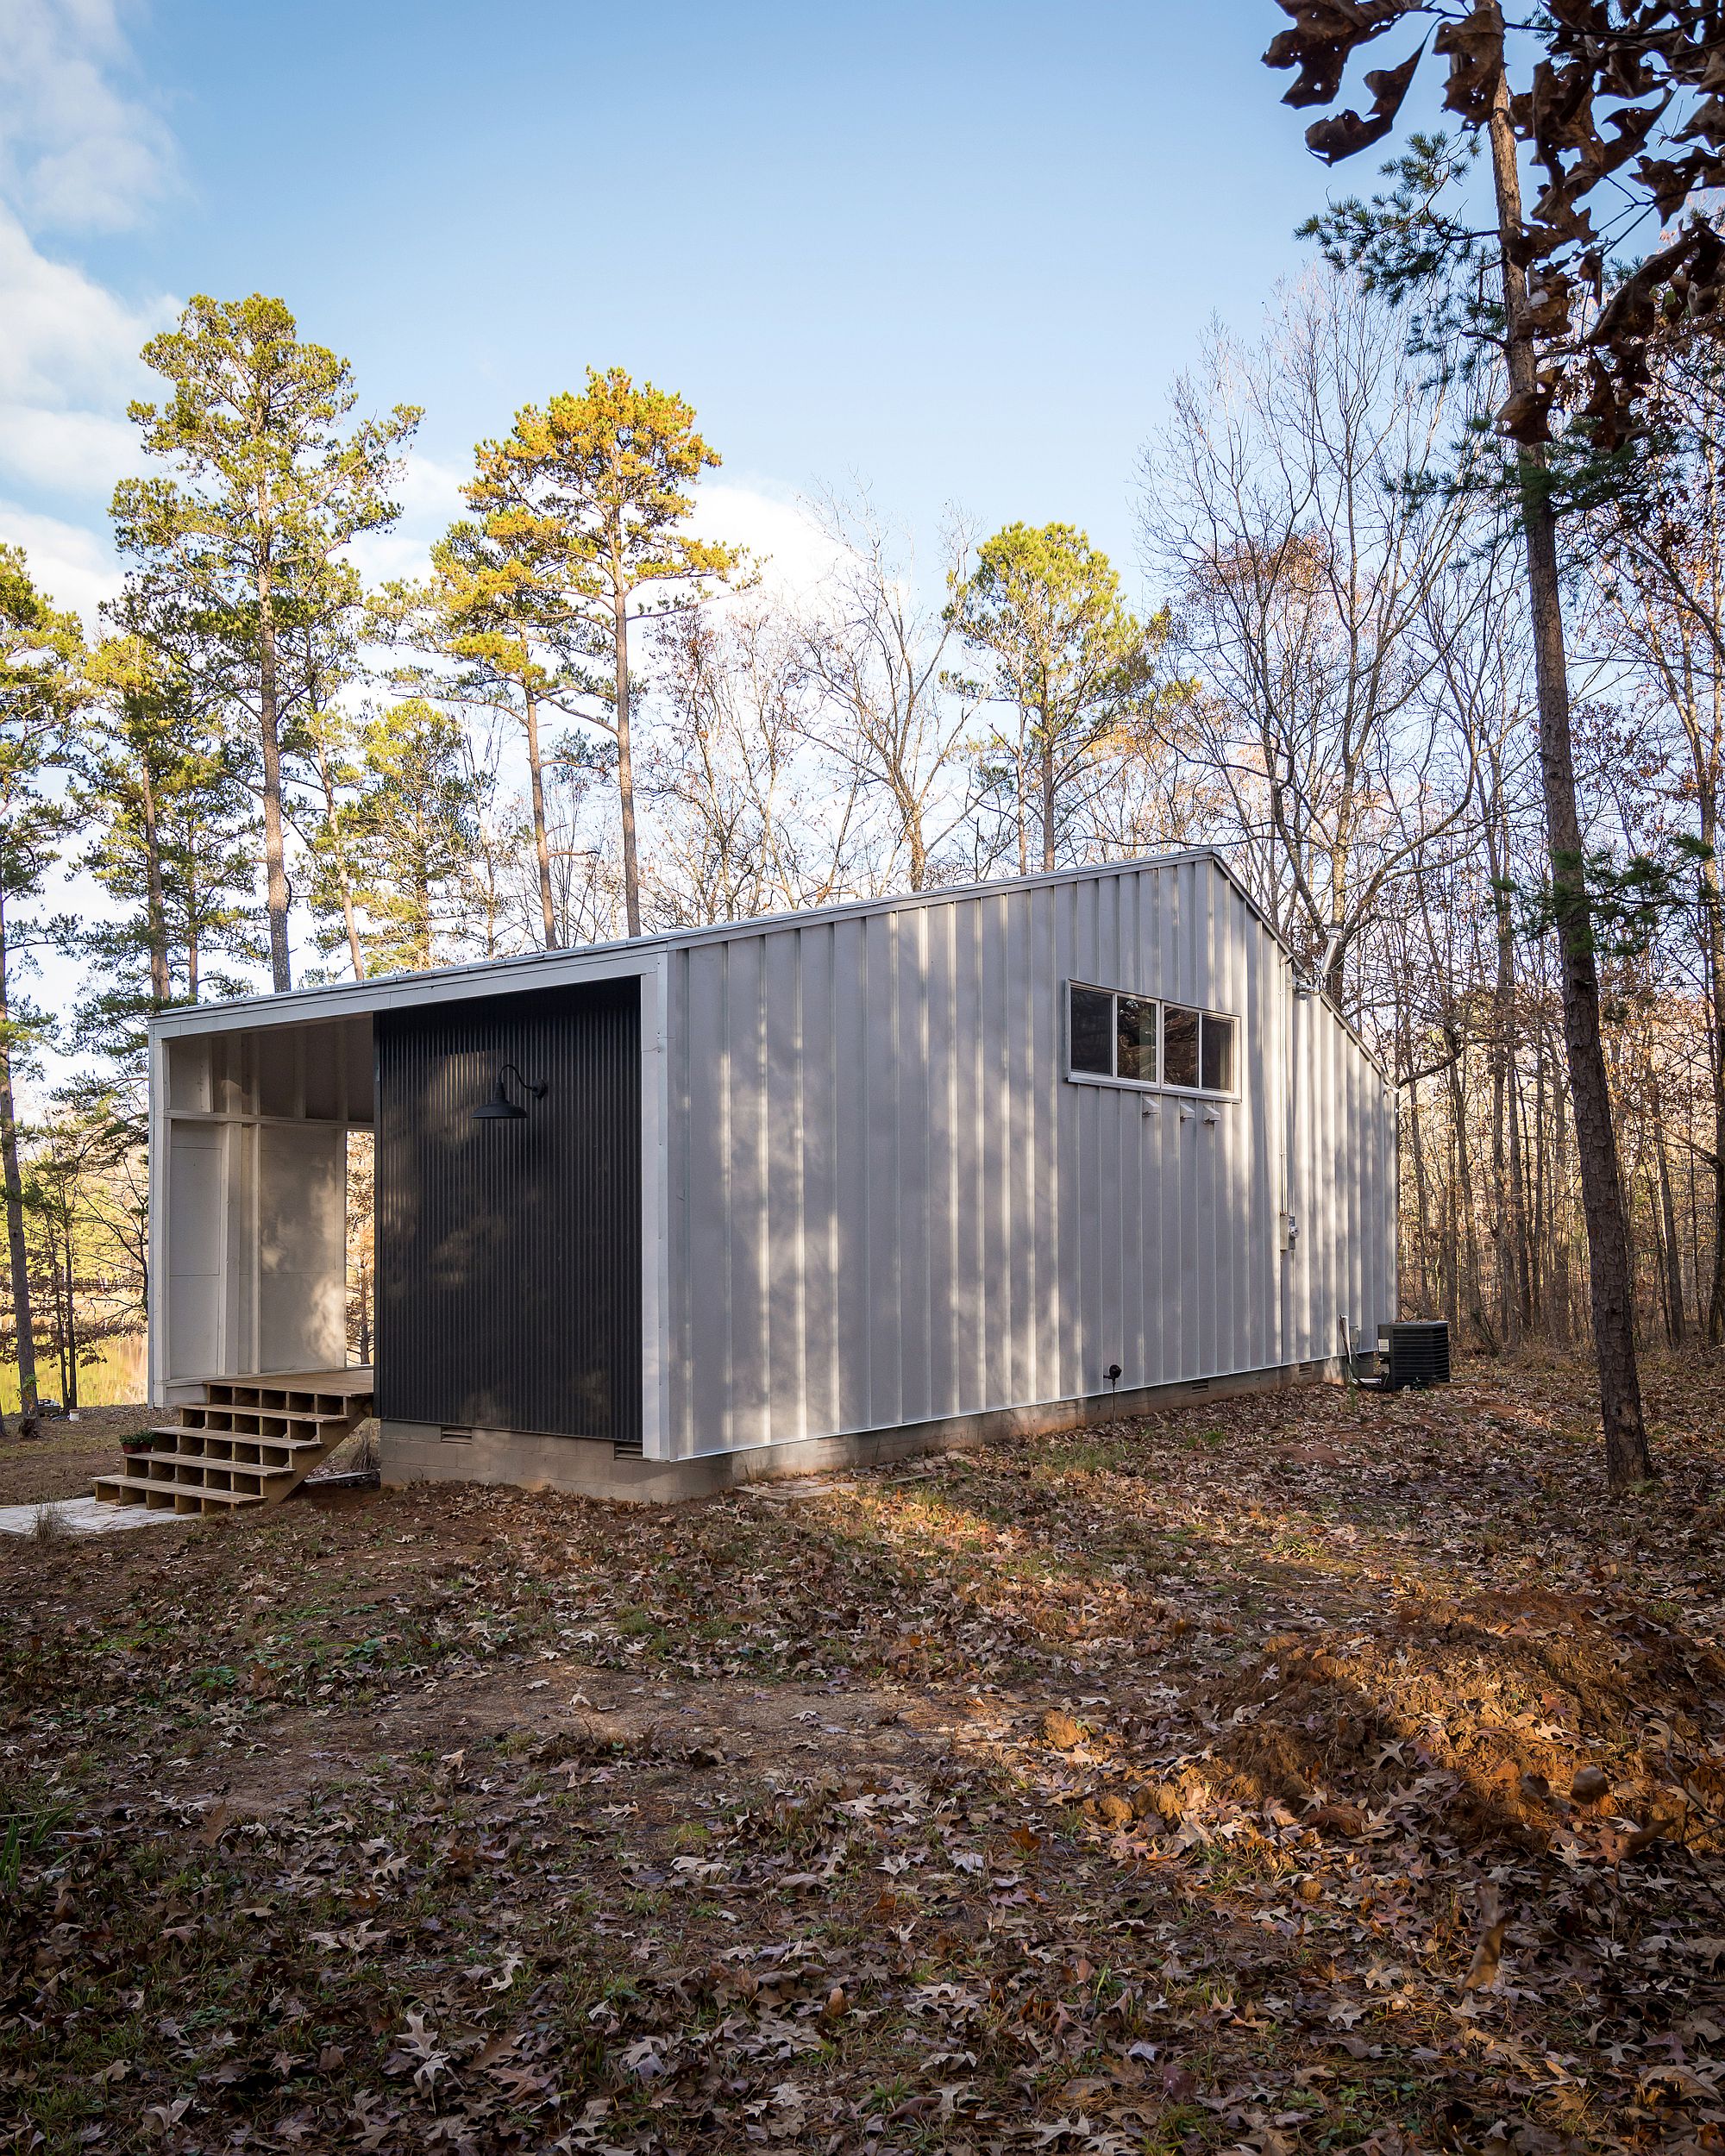 Metal panels create a cool cabin in the woods